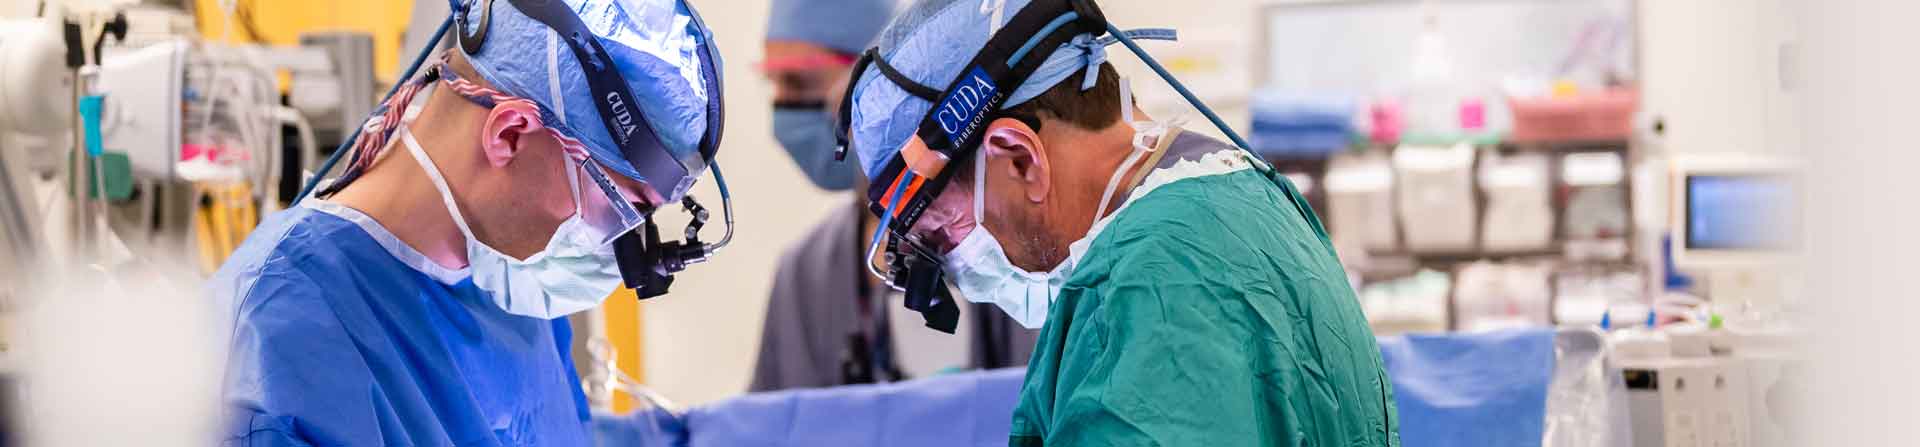 Two surgeons working together on a heart transplant